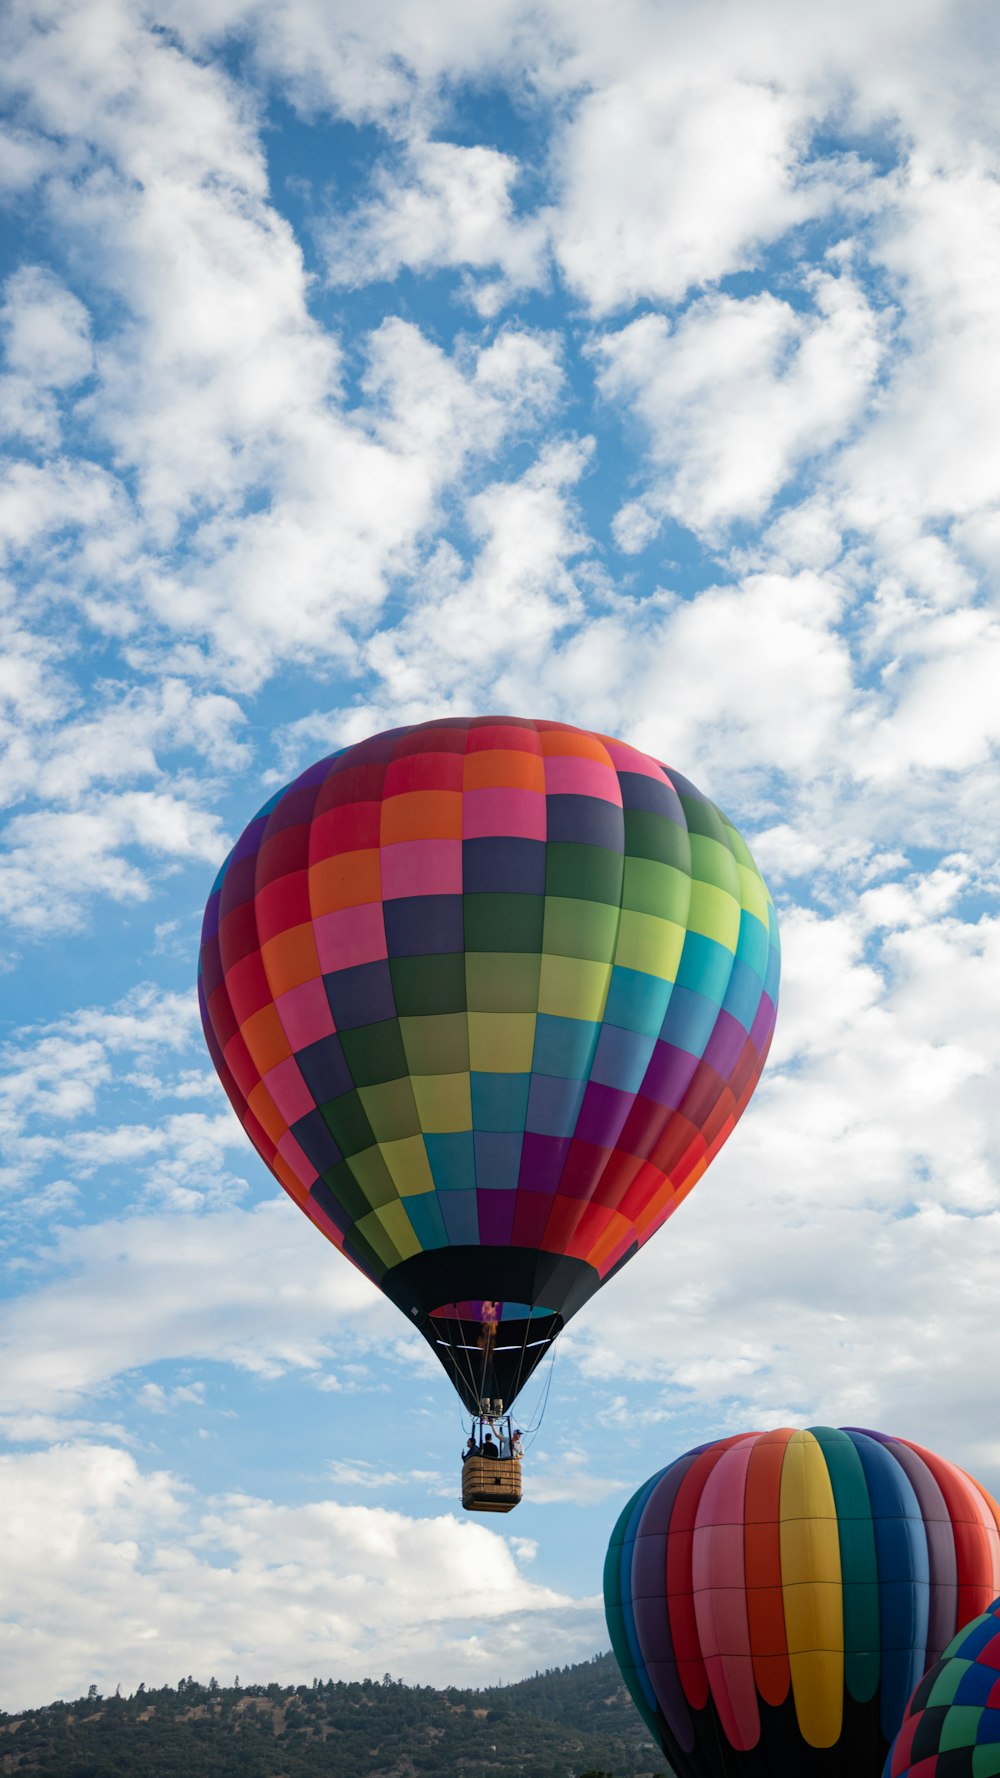 a group of colorful hot air balloons